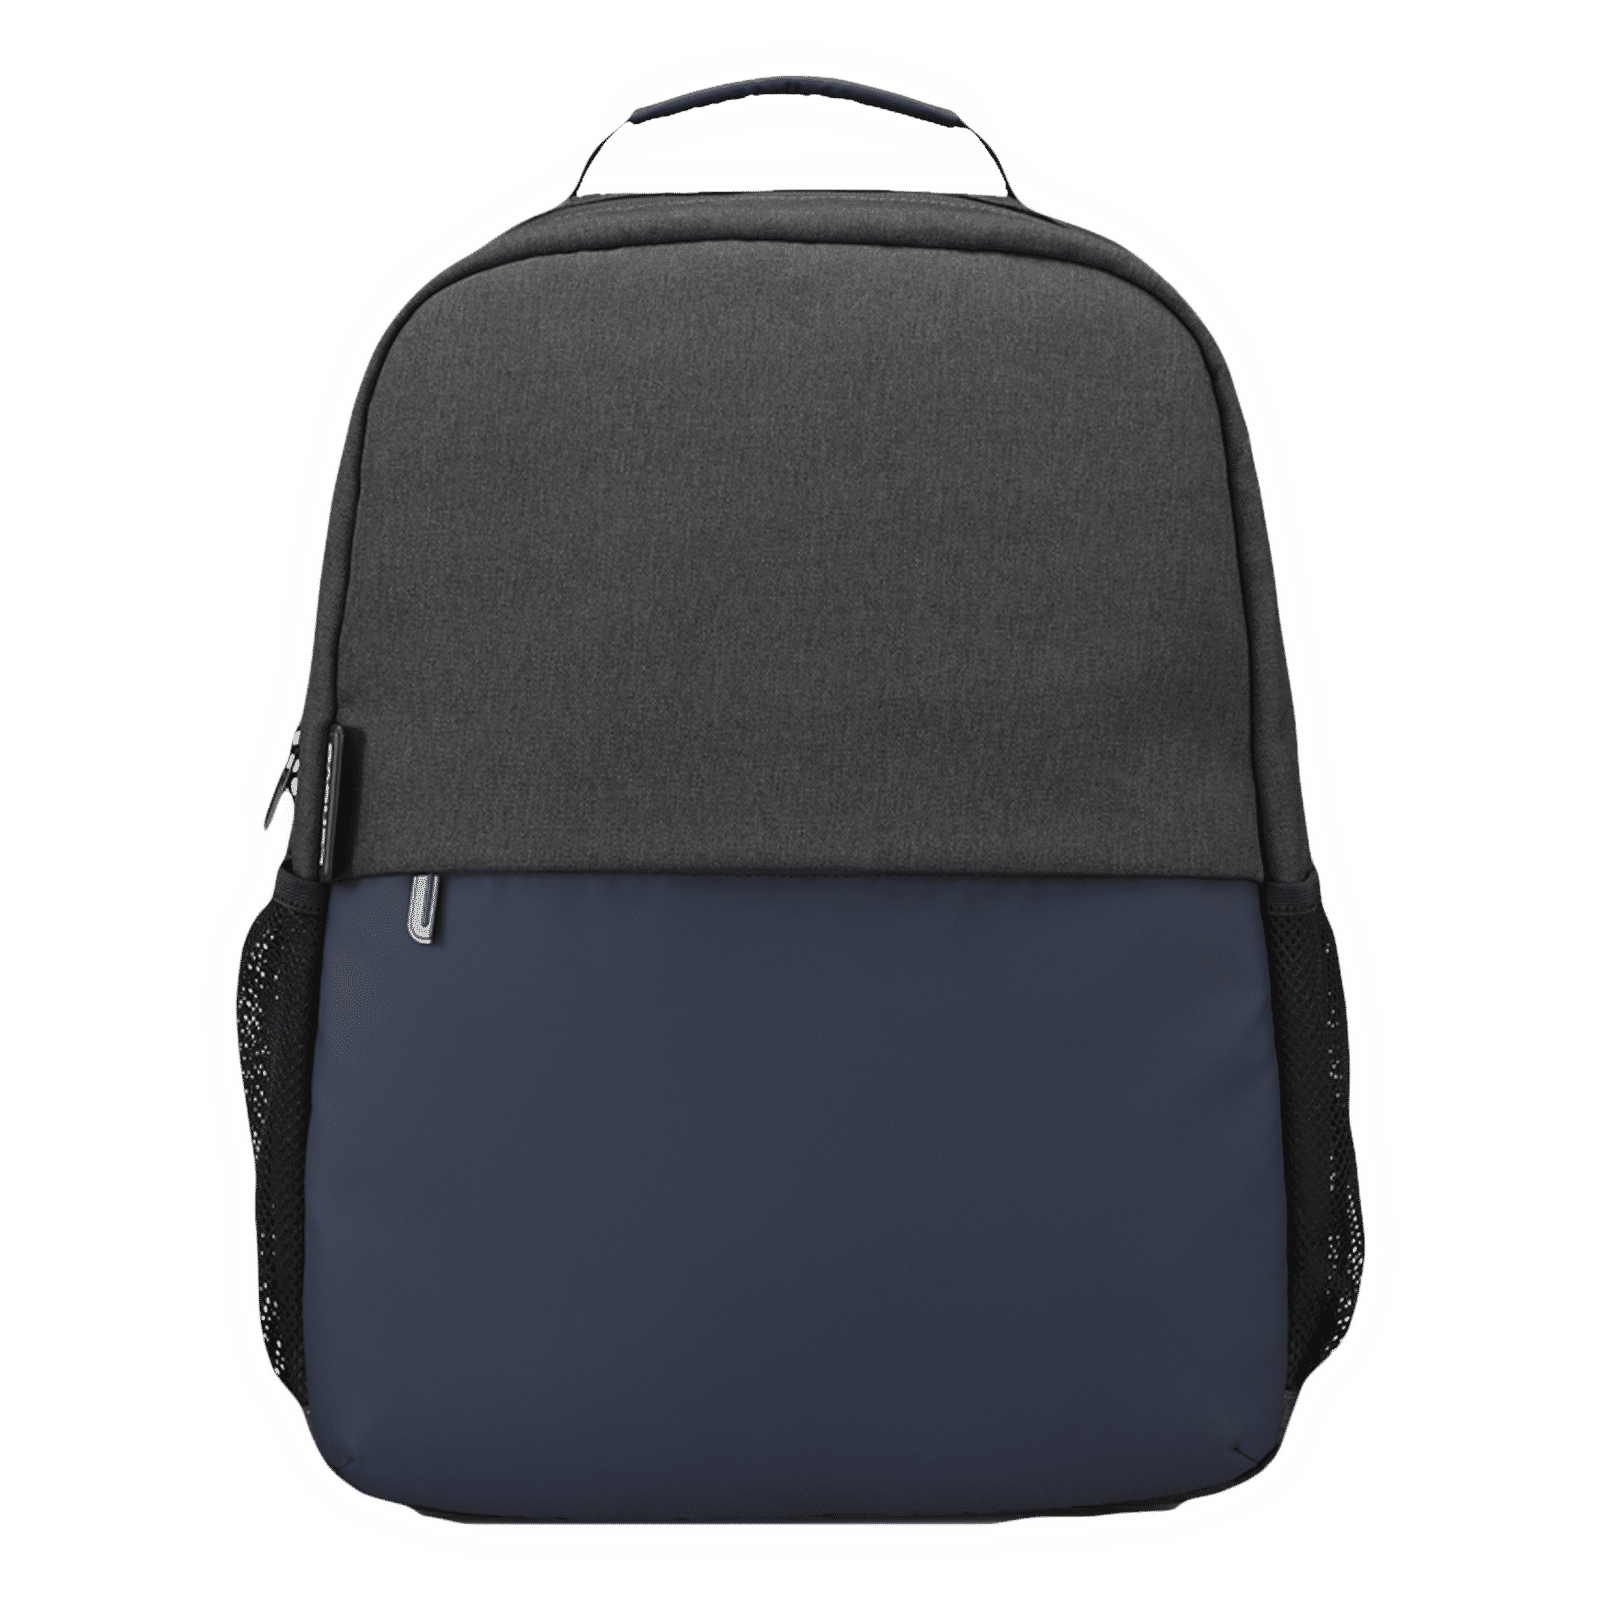 Laptop Bag - Midnight Deals | Your laptop's life partner is here at half  the price! Get laptop bags on Croma's #Midnightdeals at up to 50% off from  Monday - Thursday from 10 pm - 2... | By CromaFacebook